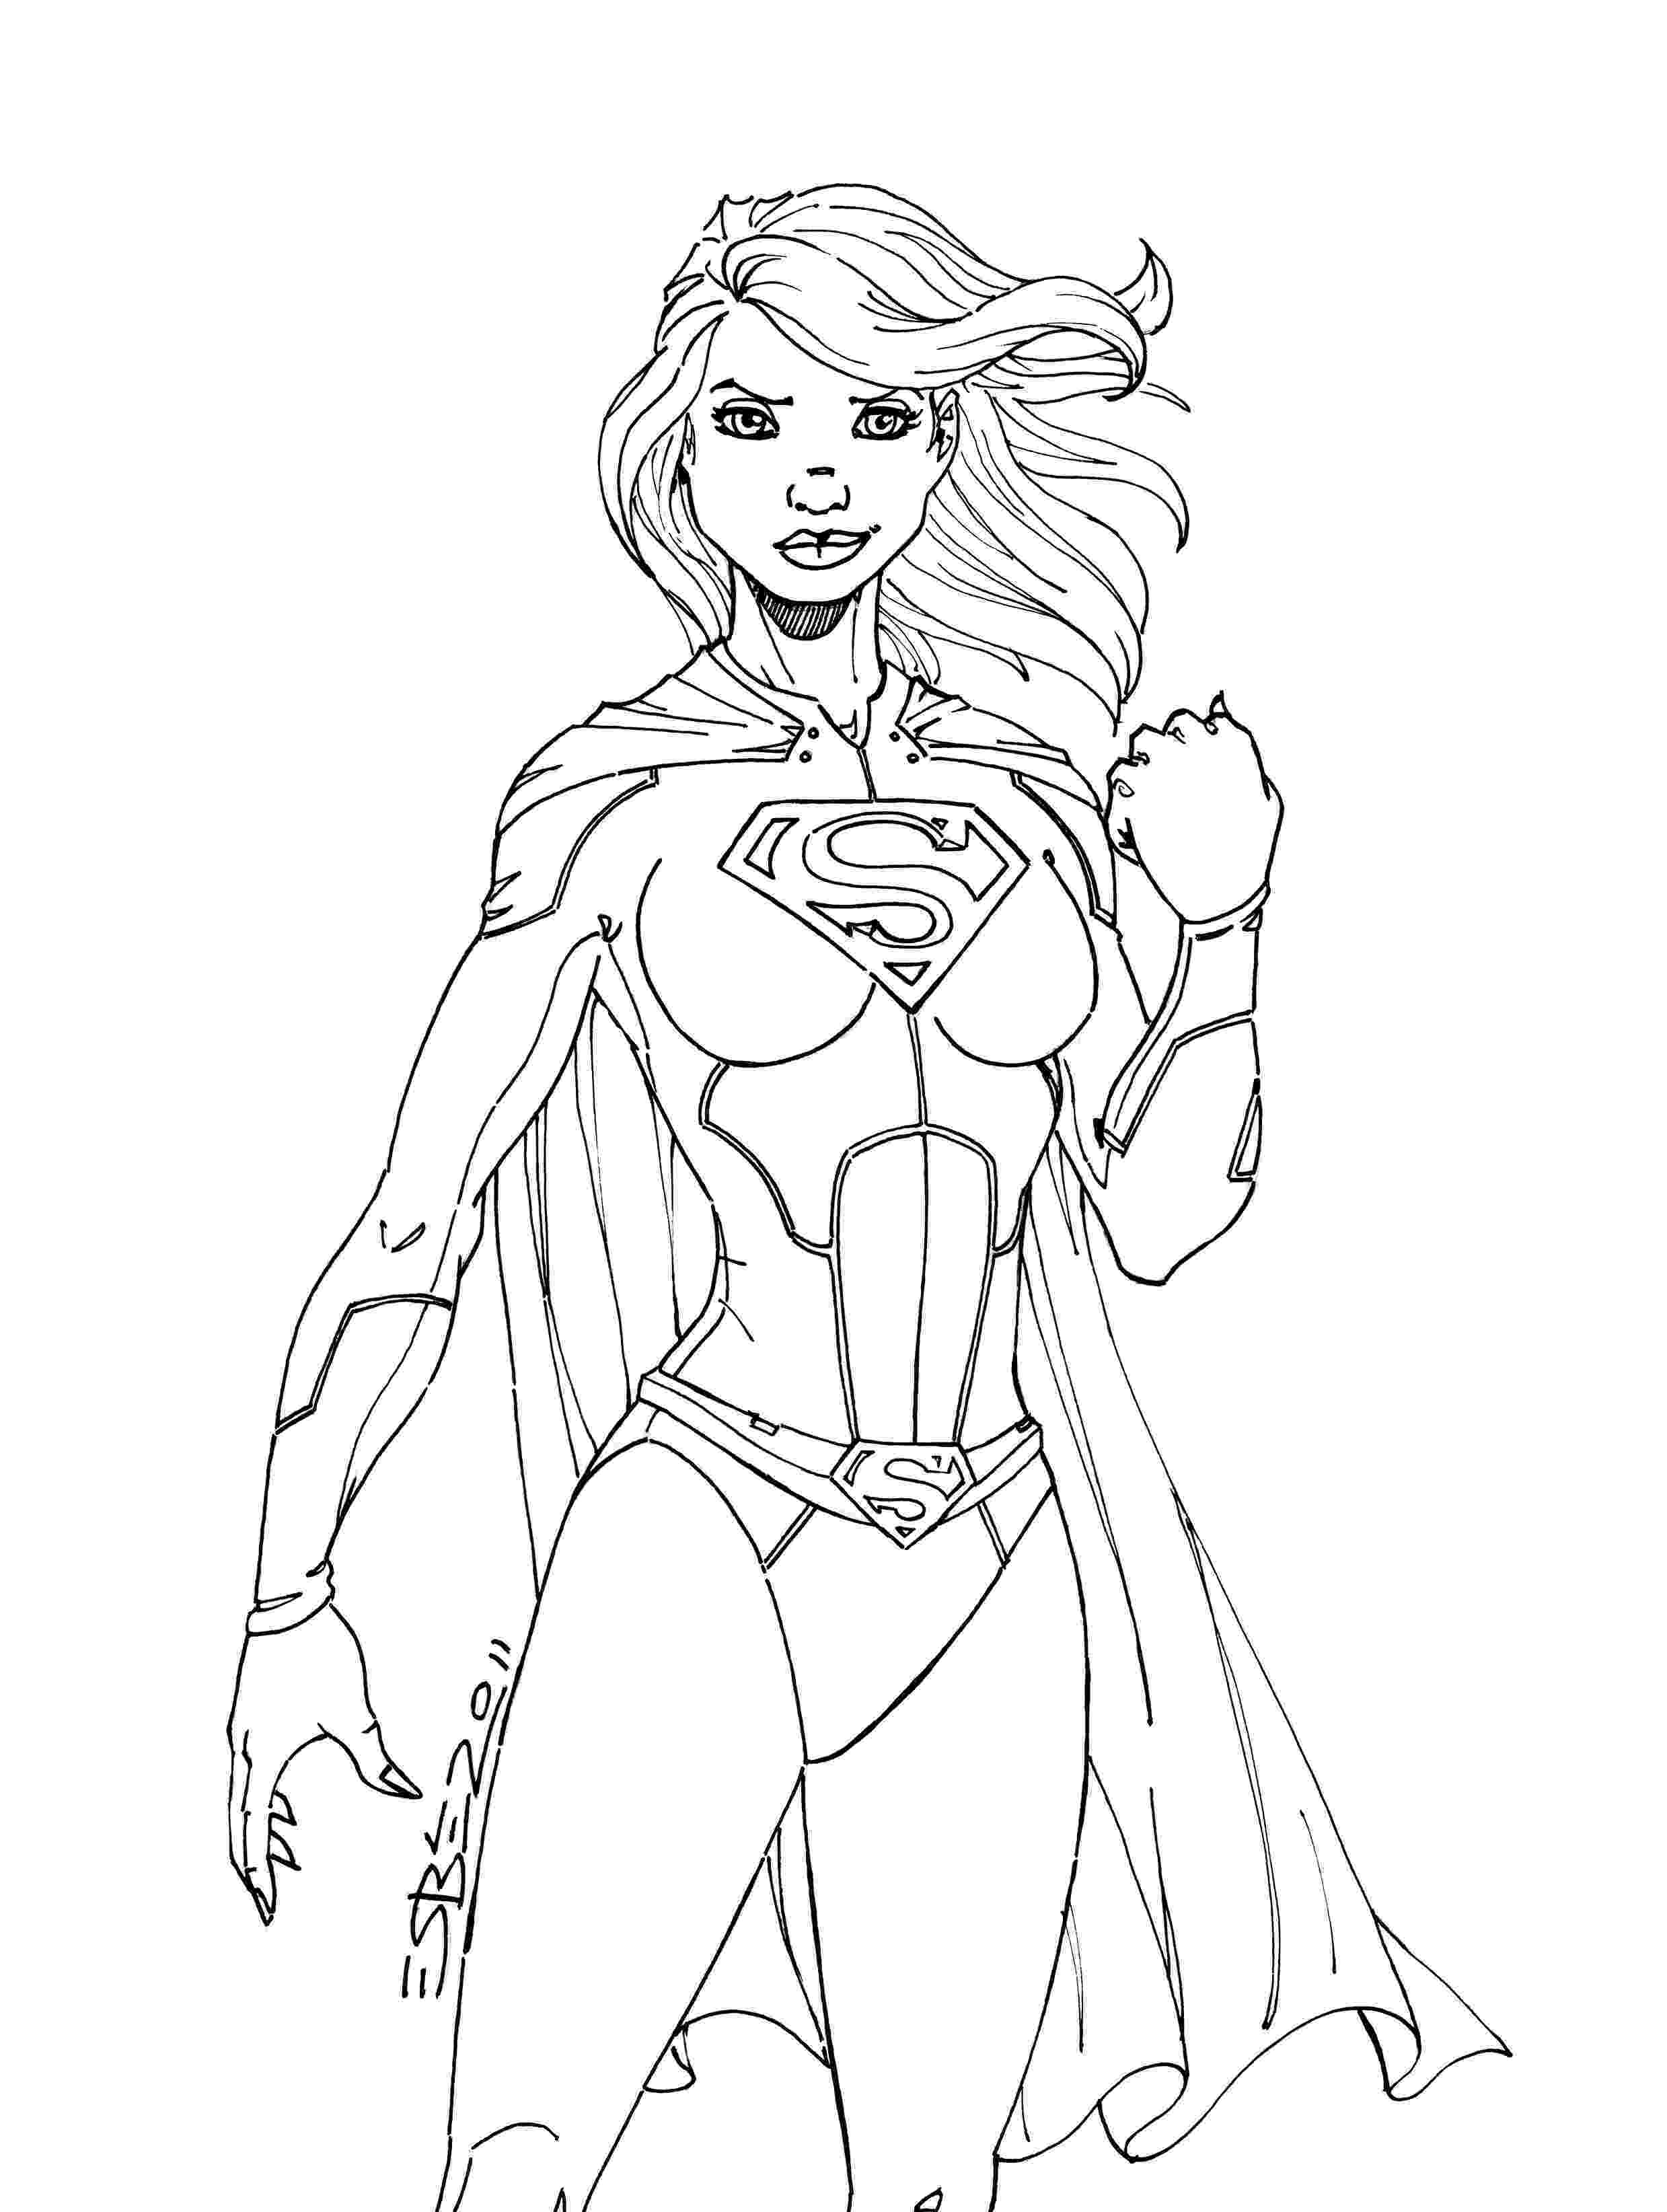 girl coloring sheets supergirl coloring pages to download and print for free girl coloring sheets 